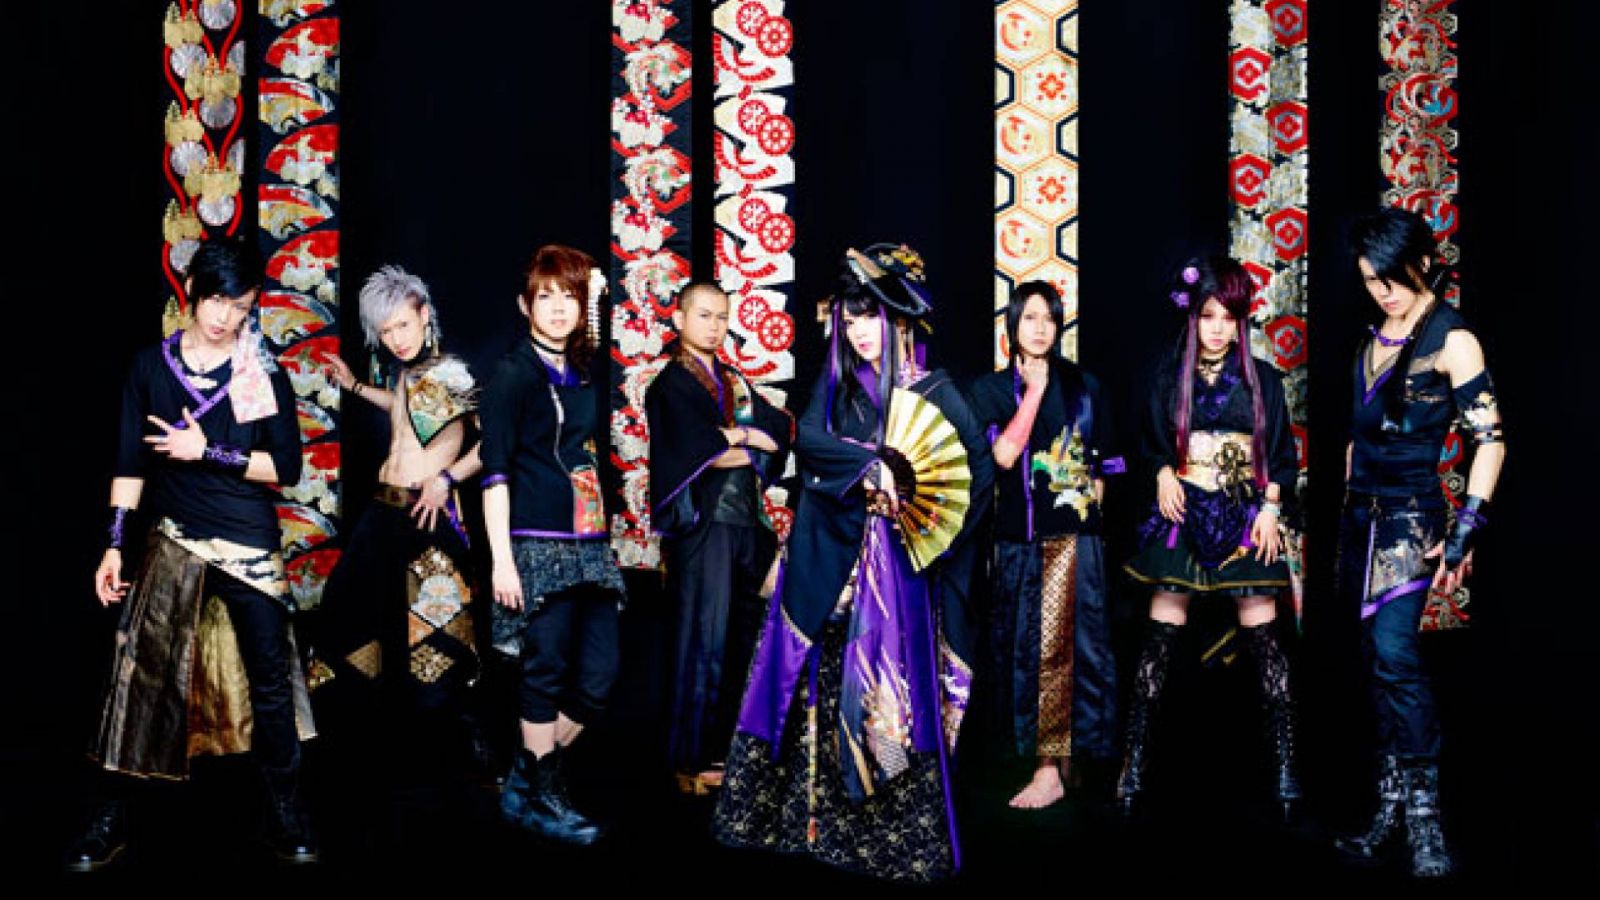 Wagakki Band – Strong Fate © 2015 Avex Music Creative Inc. Provided by Cool Japan Music, Inc.